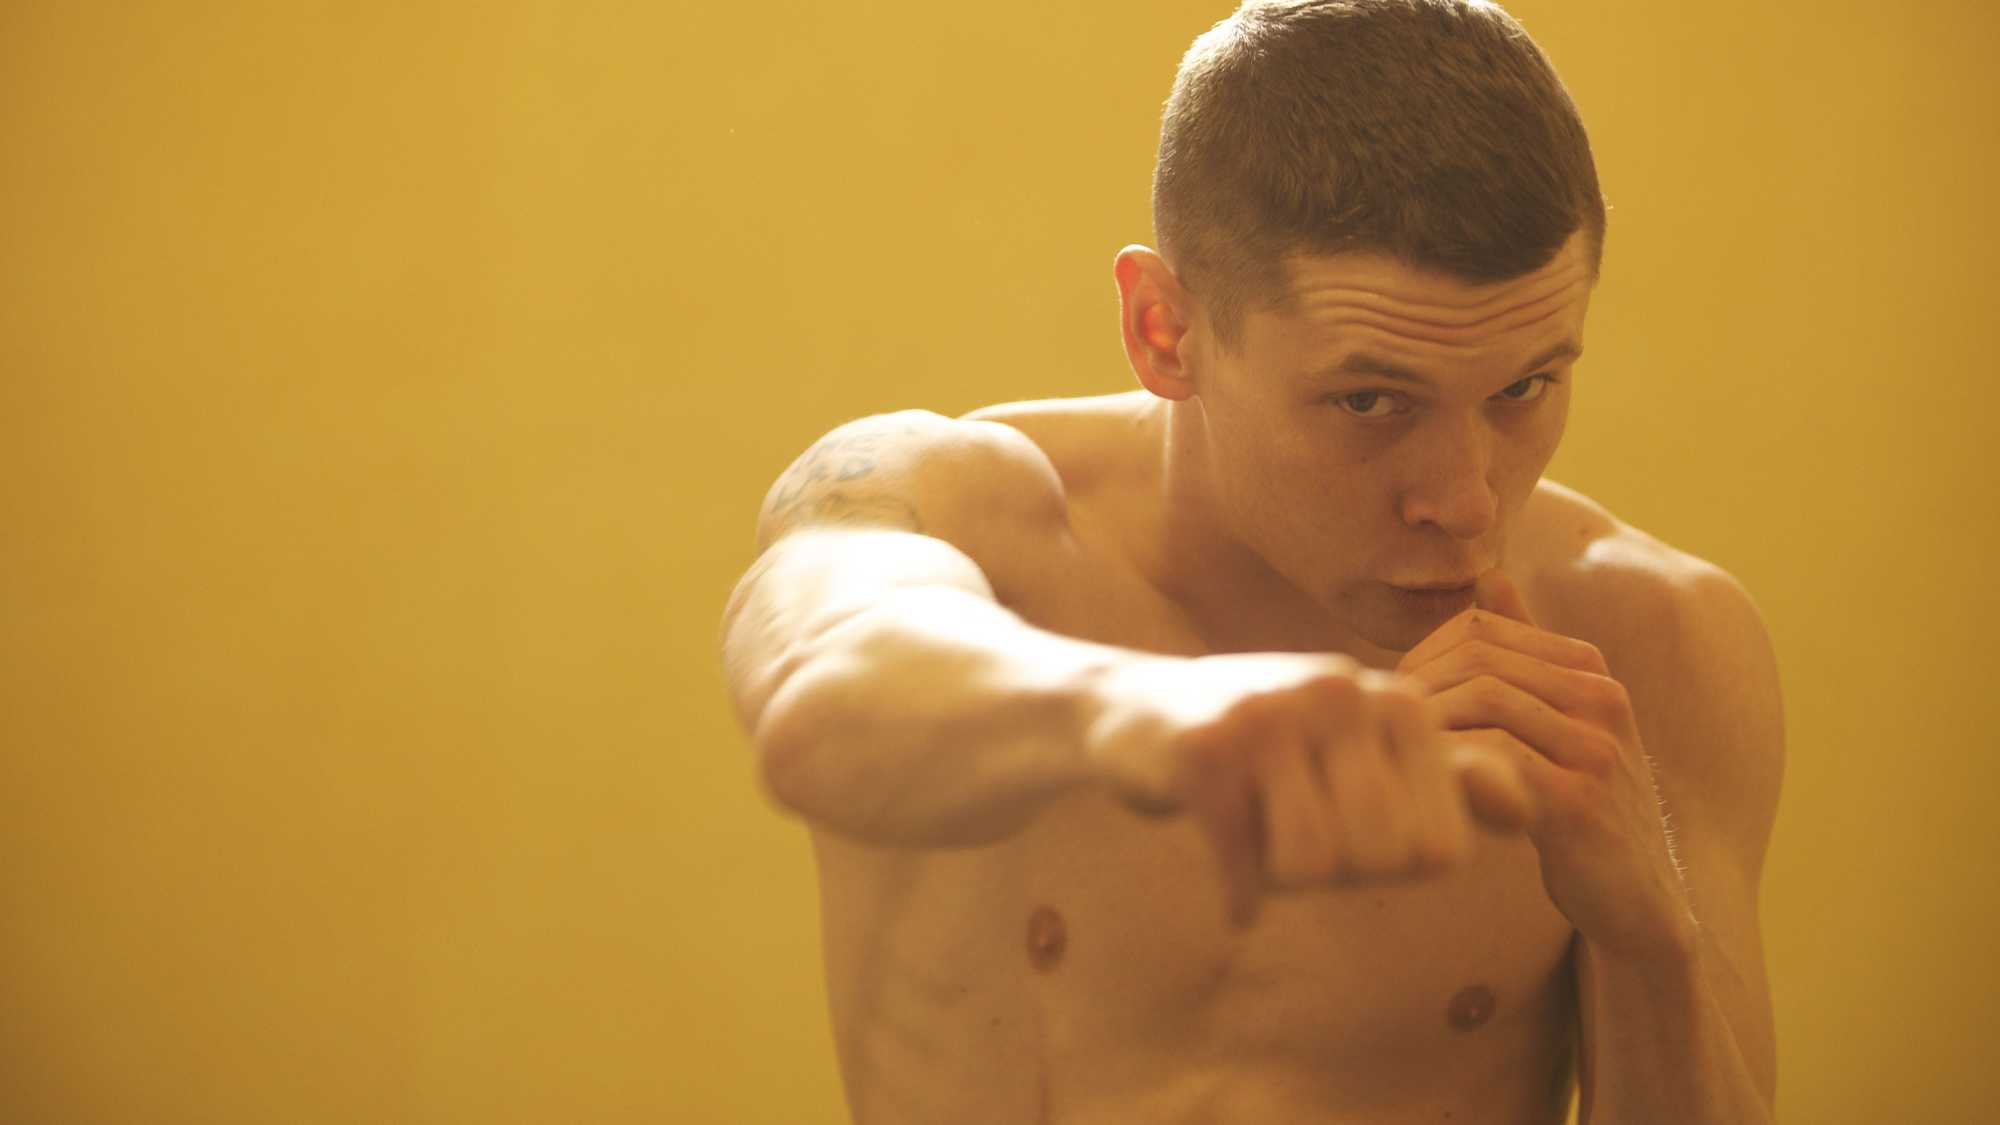 Starred Up Pics, Movie Collection